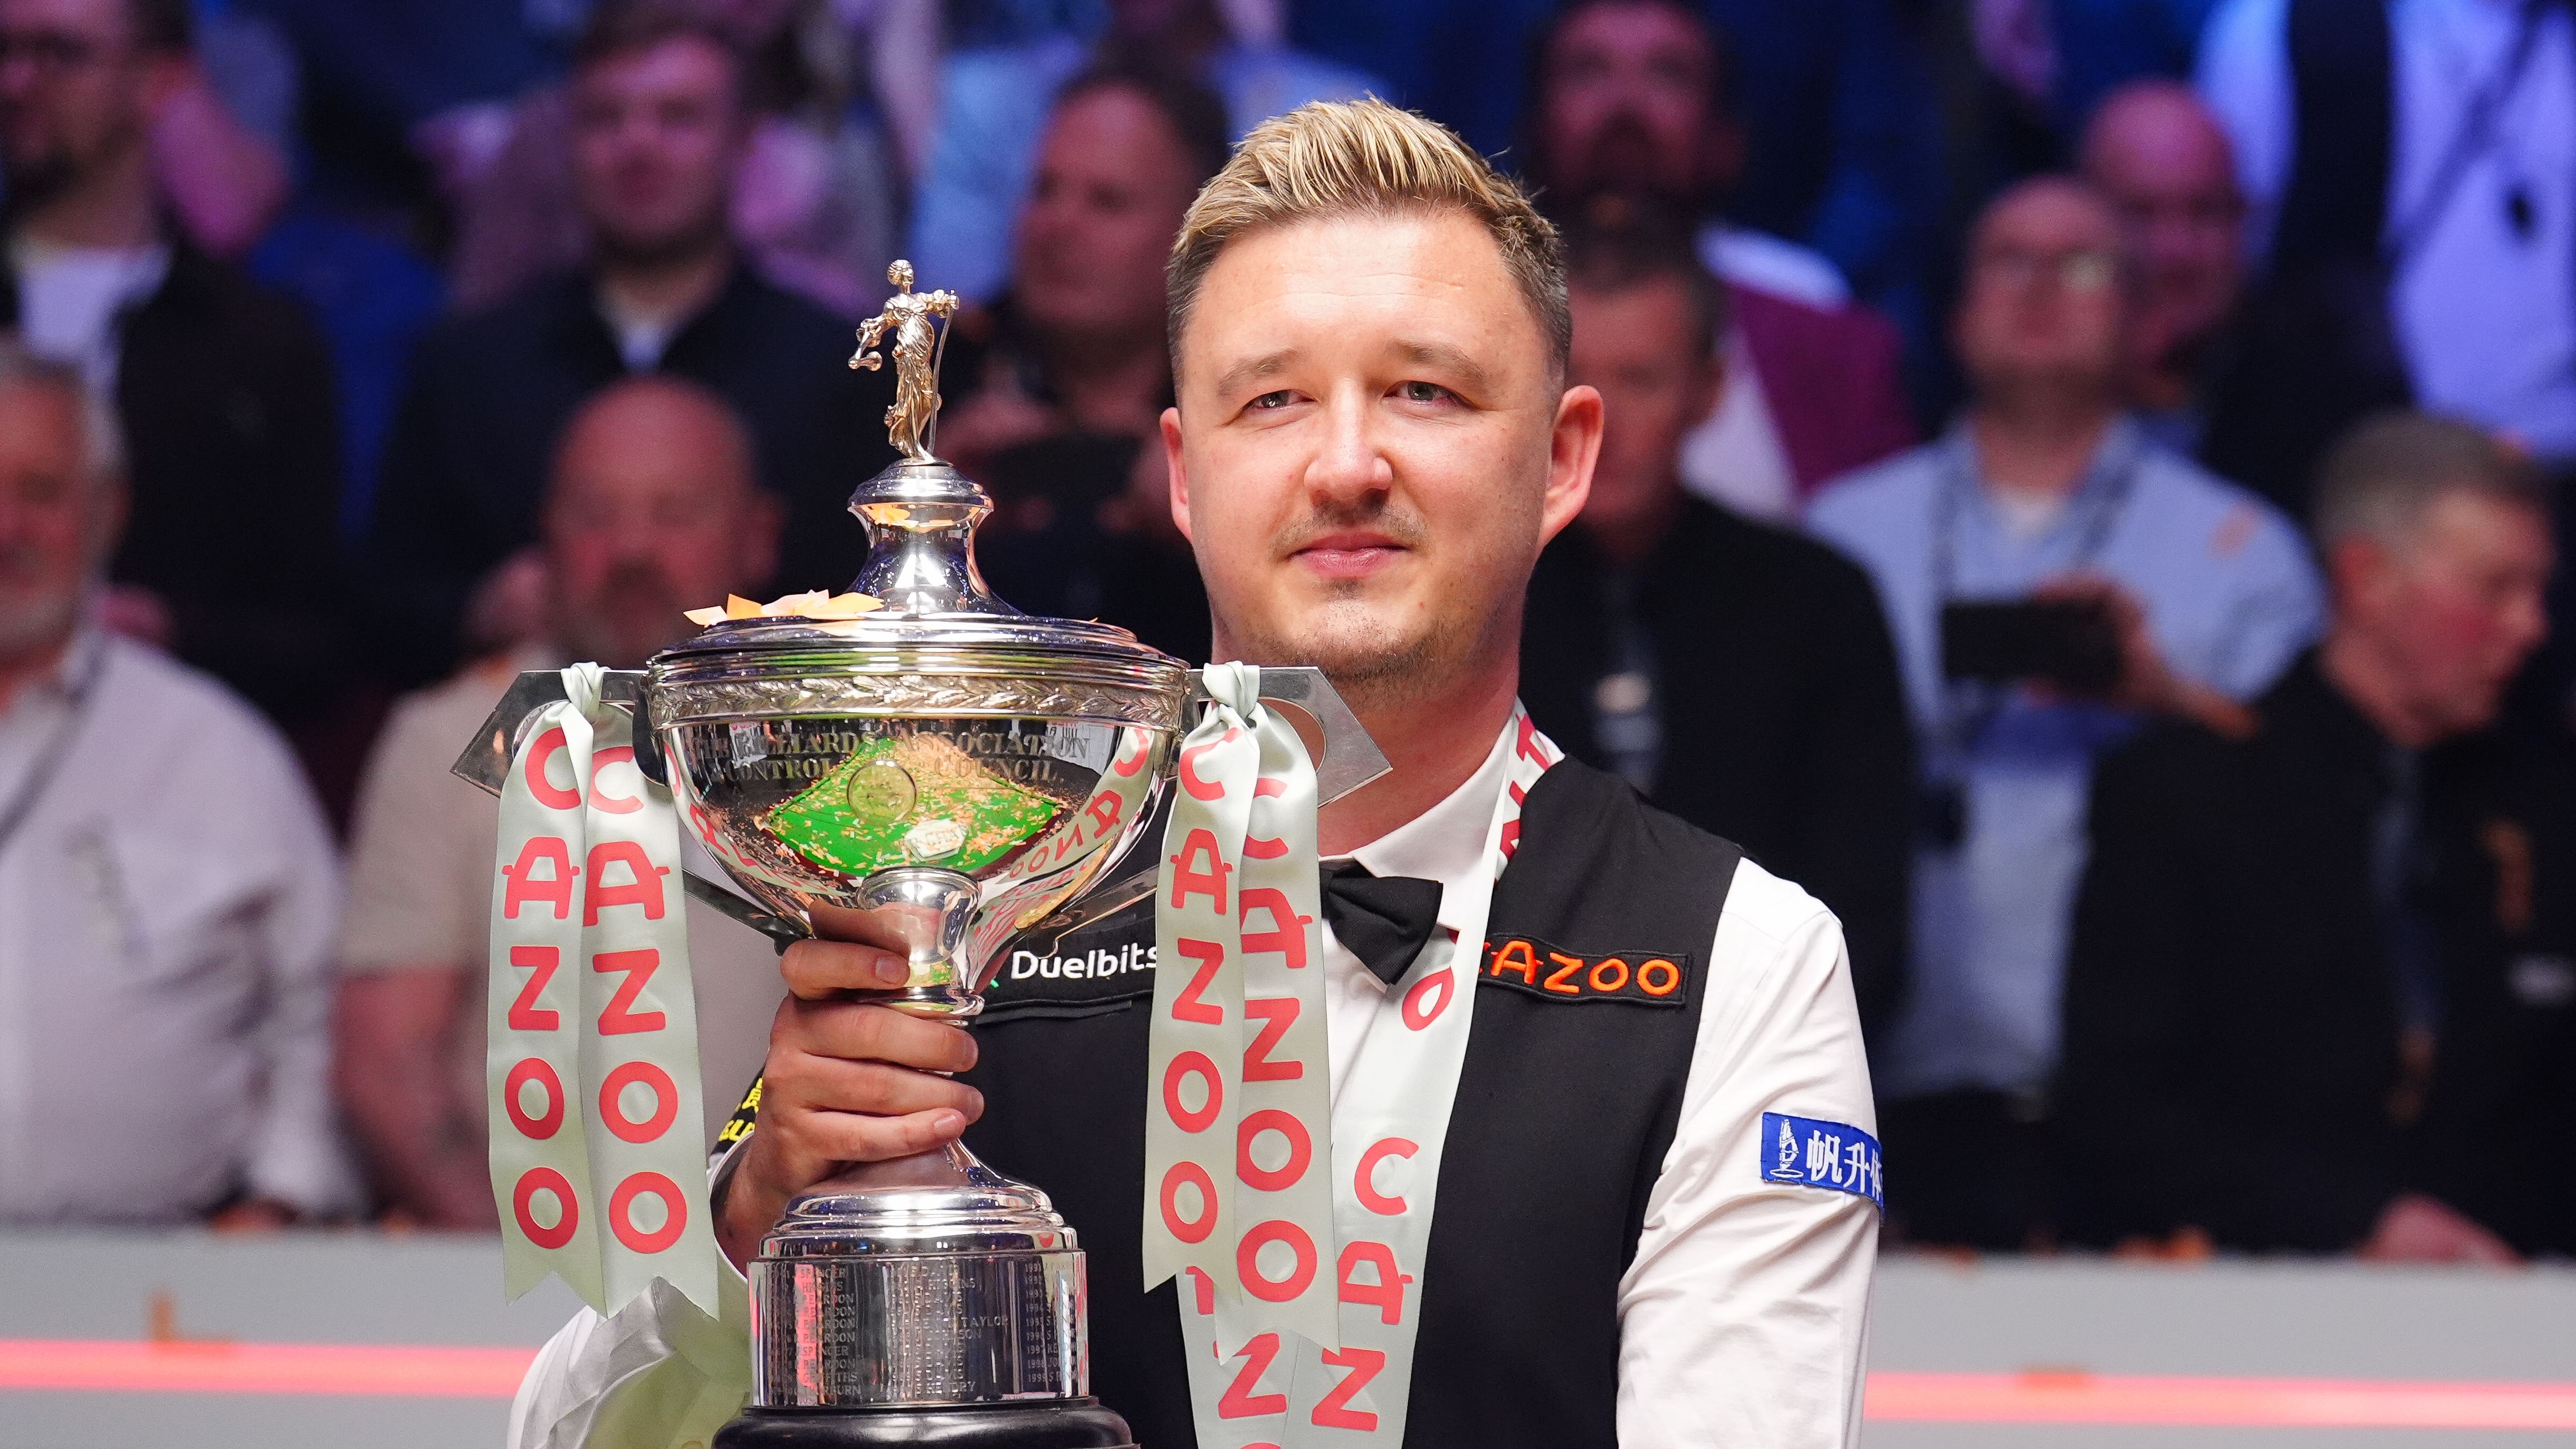 New world champion Kyren Wilson hopes to build legacy as one of snooker greats